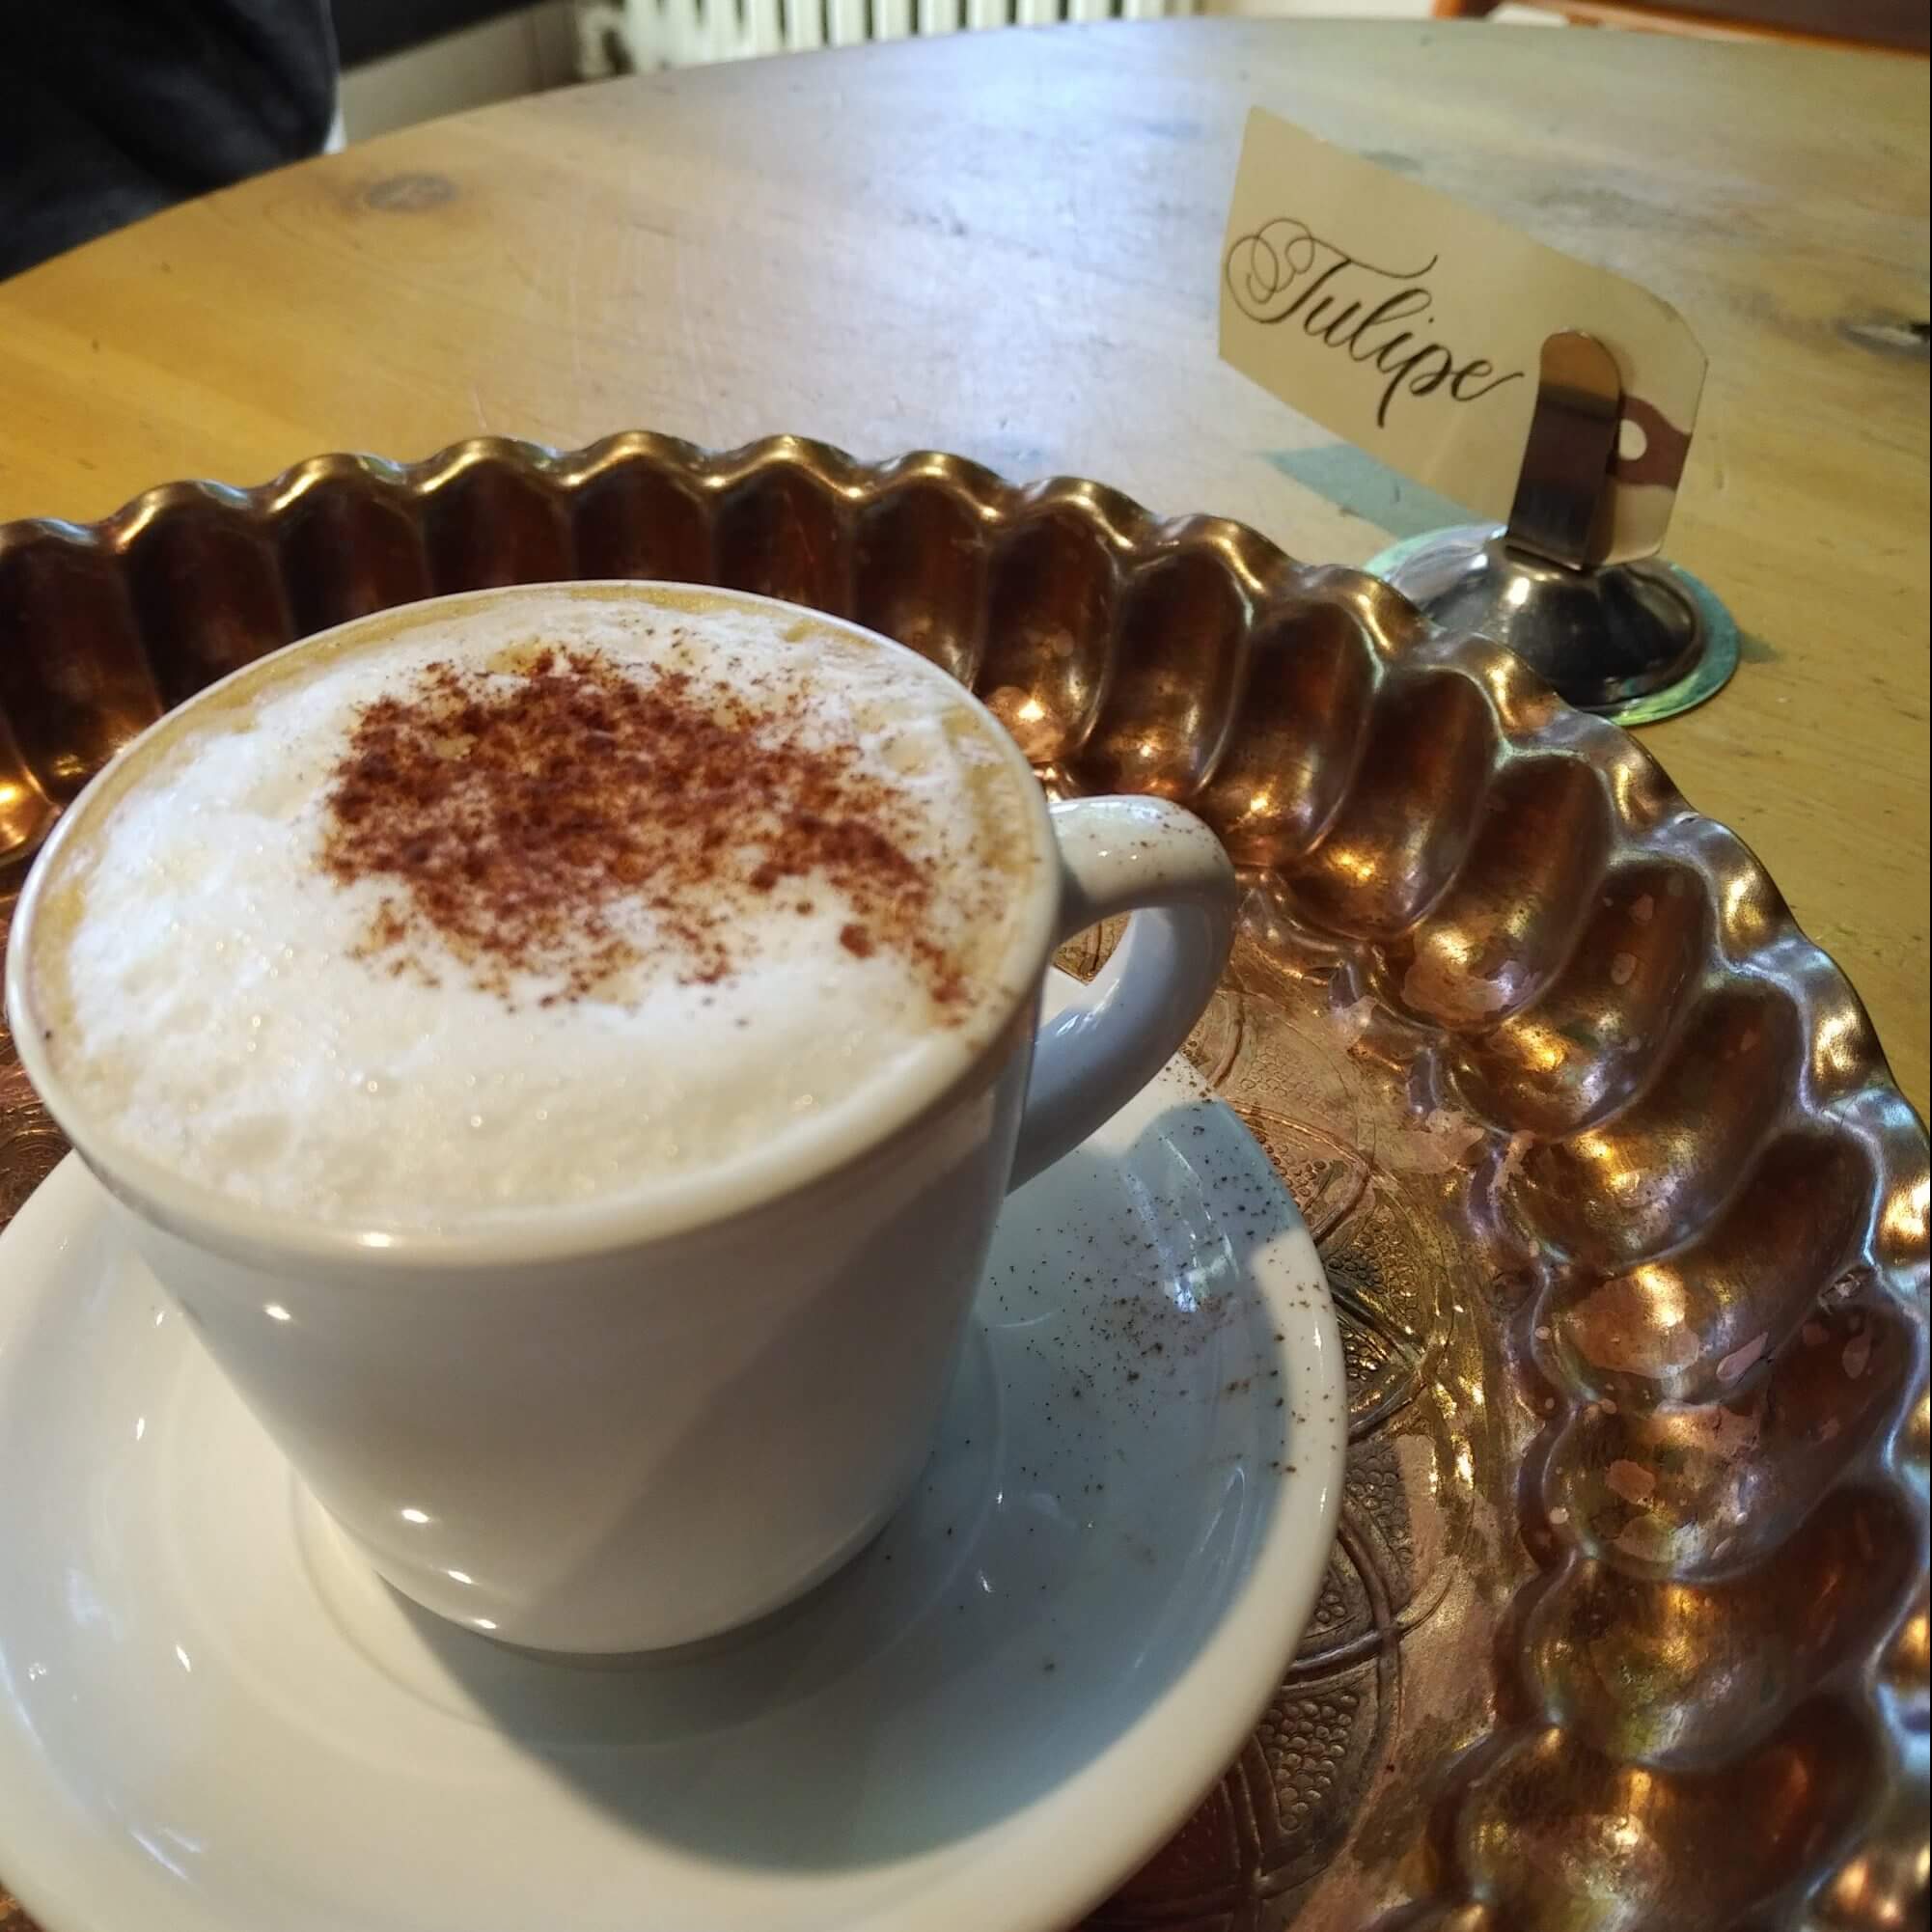 macchiato dusted with cinnamon and sitting on a copper tray